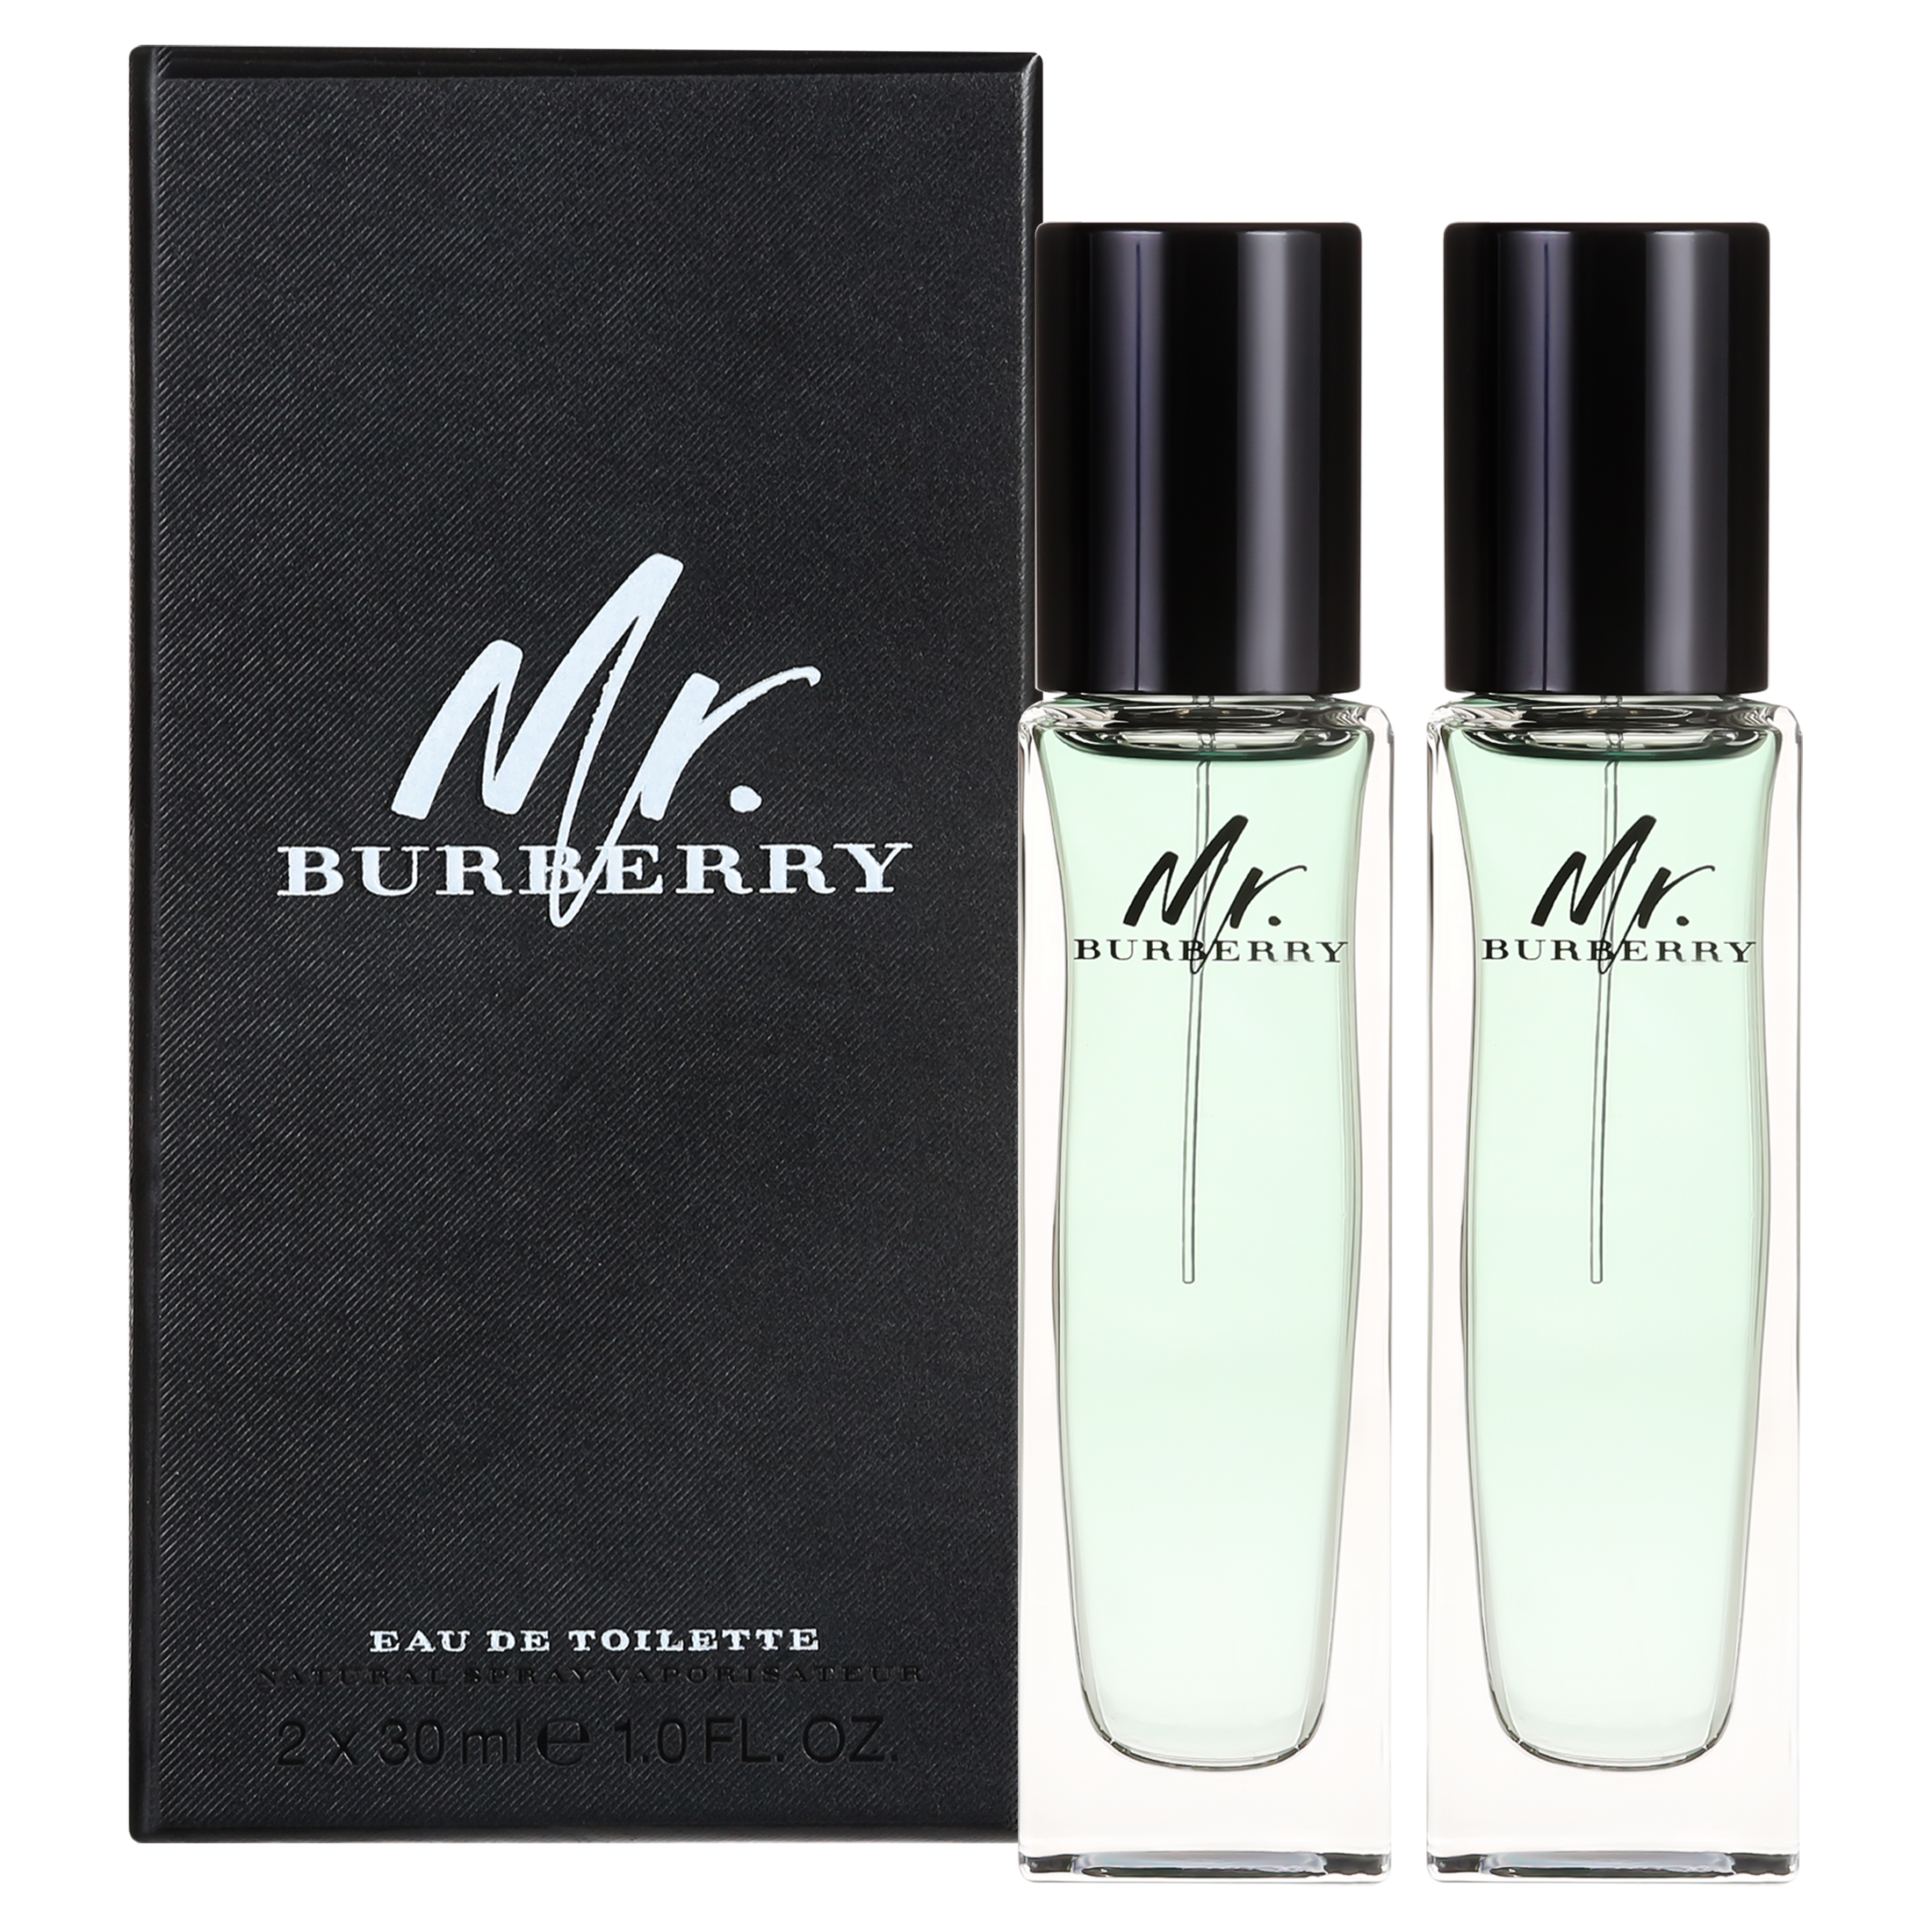 Burberry Travel Set Mini & Travel Size Cologne for Men, 2 Pieces - image 1 of 6